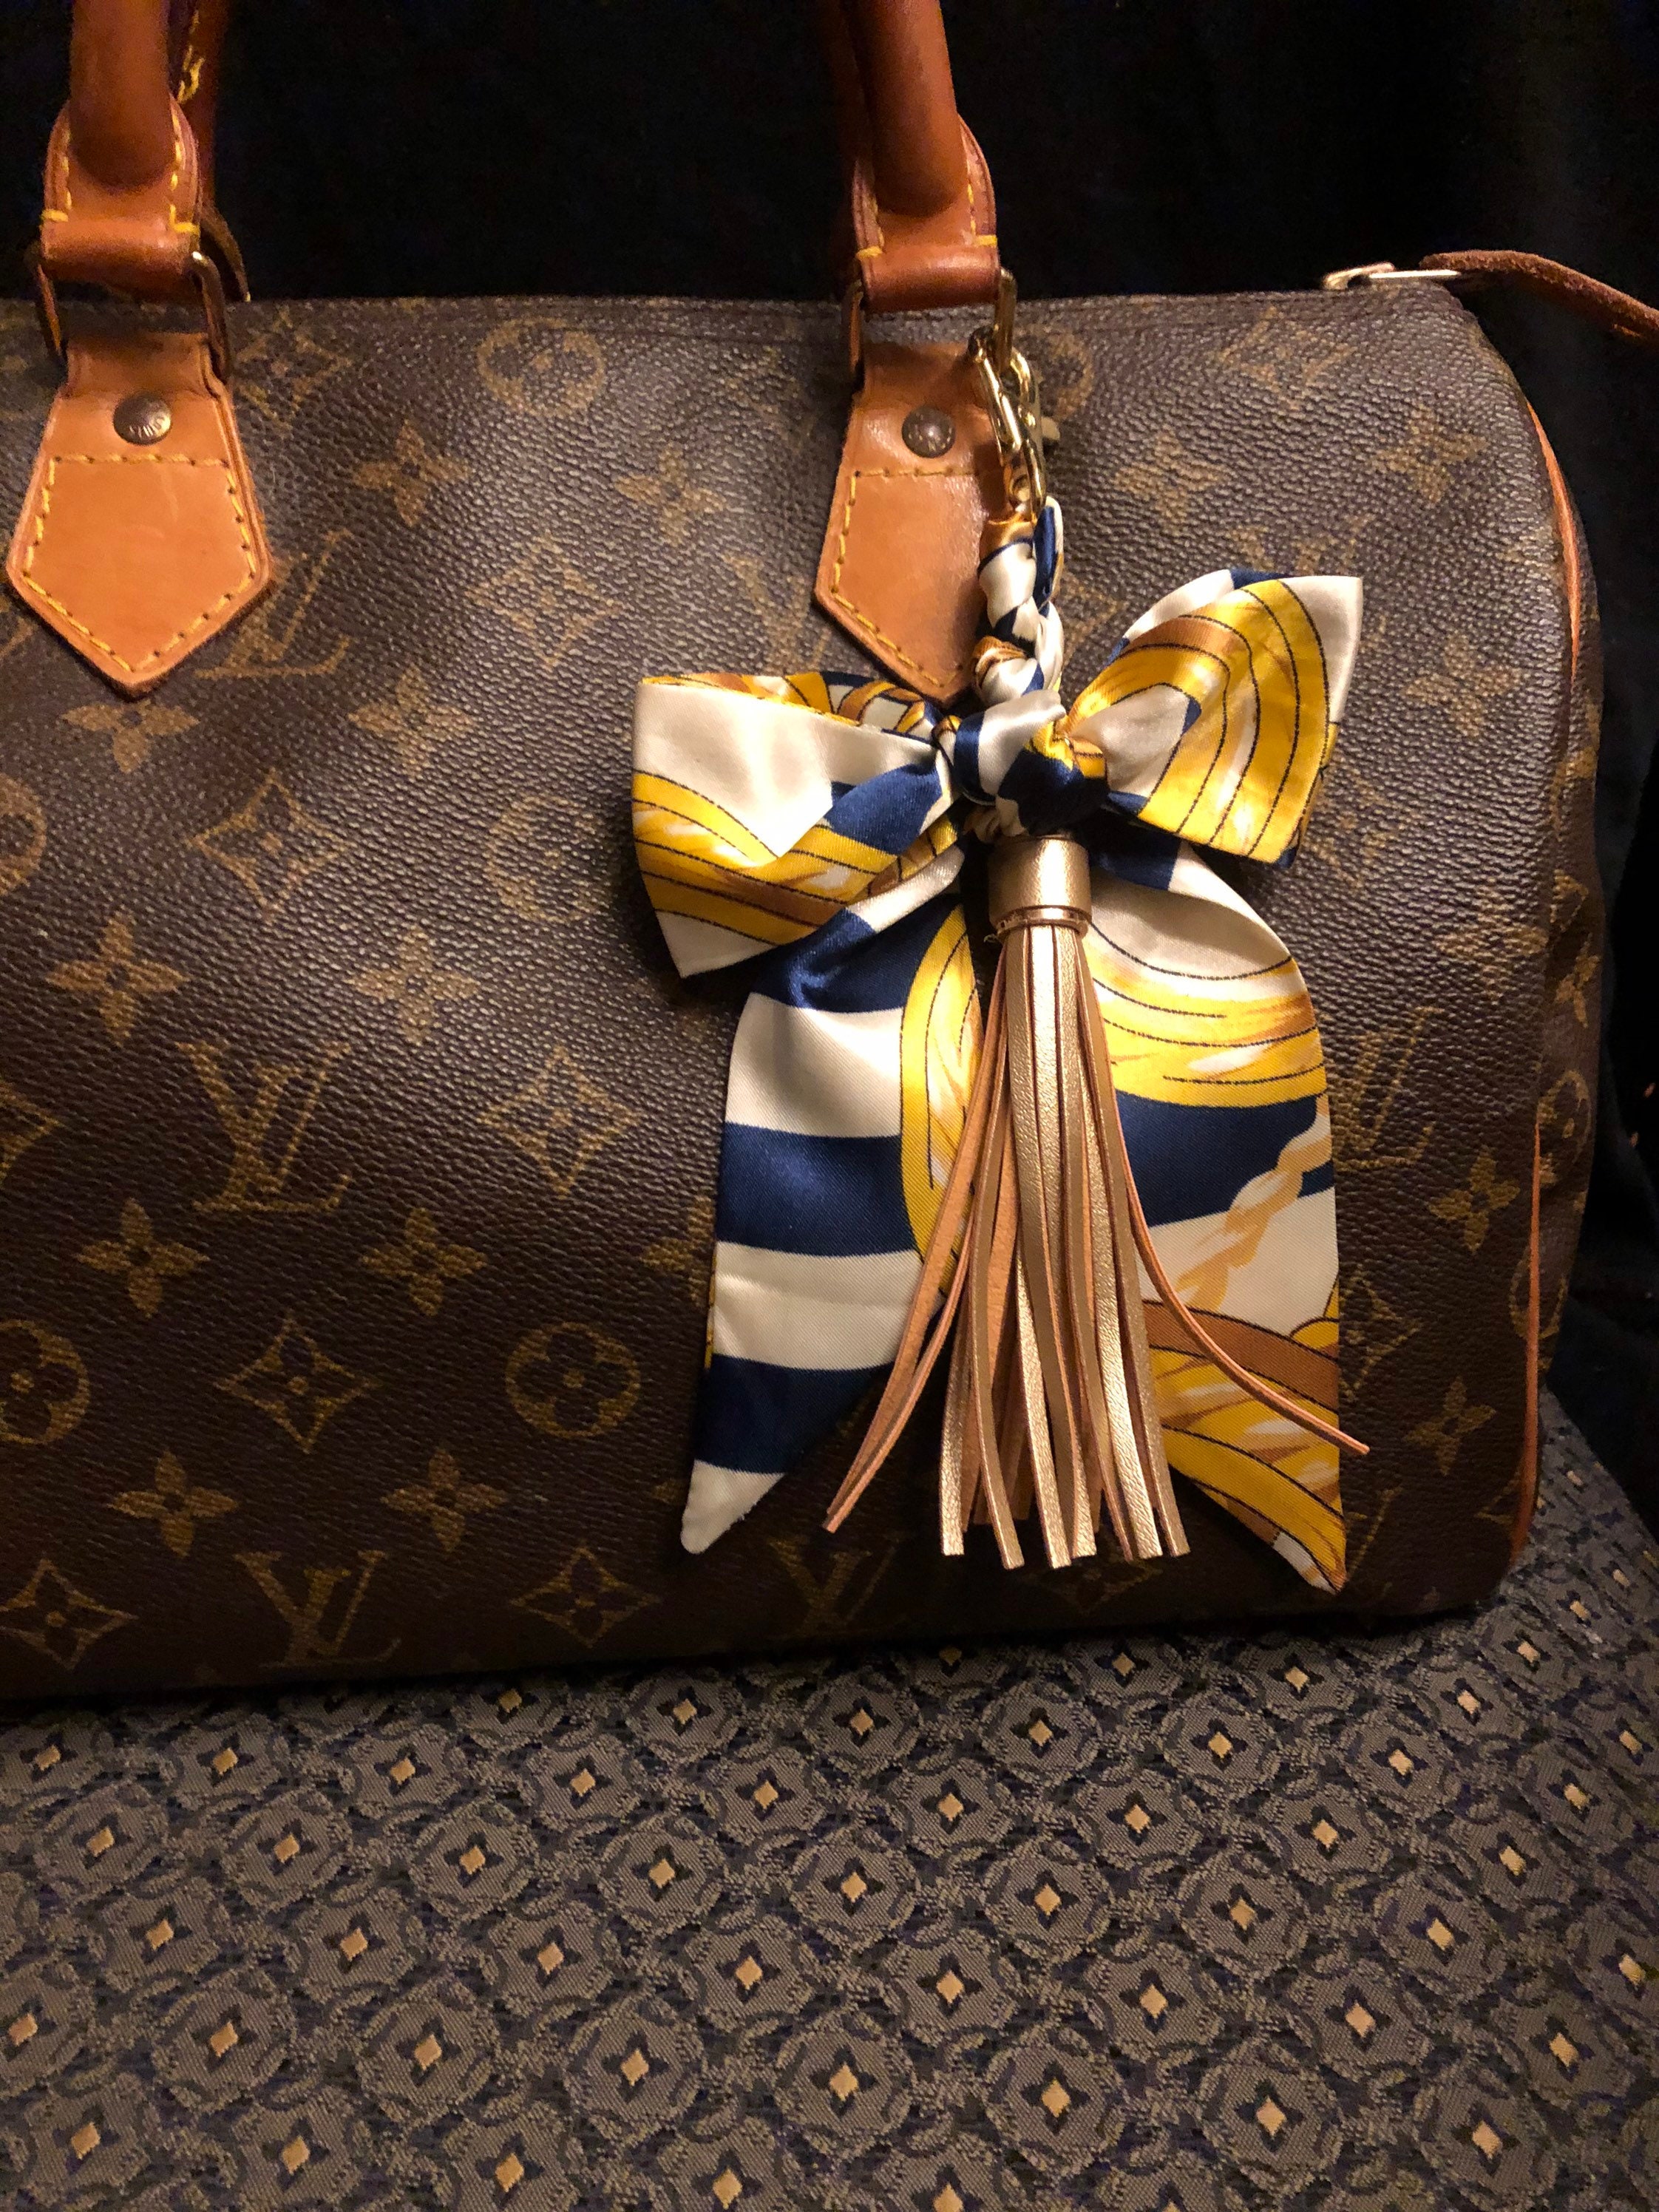 5 WAYS TO STYLE A BANDEAU ON YOUR LOUIS VUITTON HANDBAG on SPEEDY